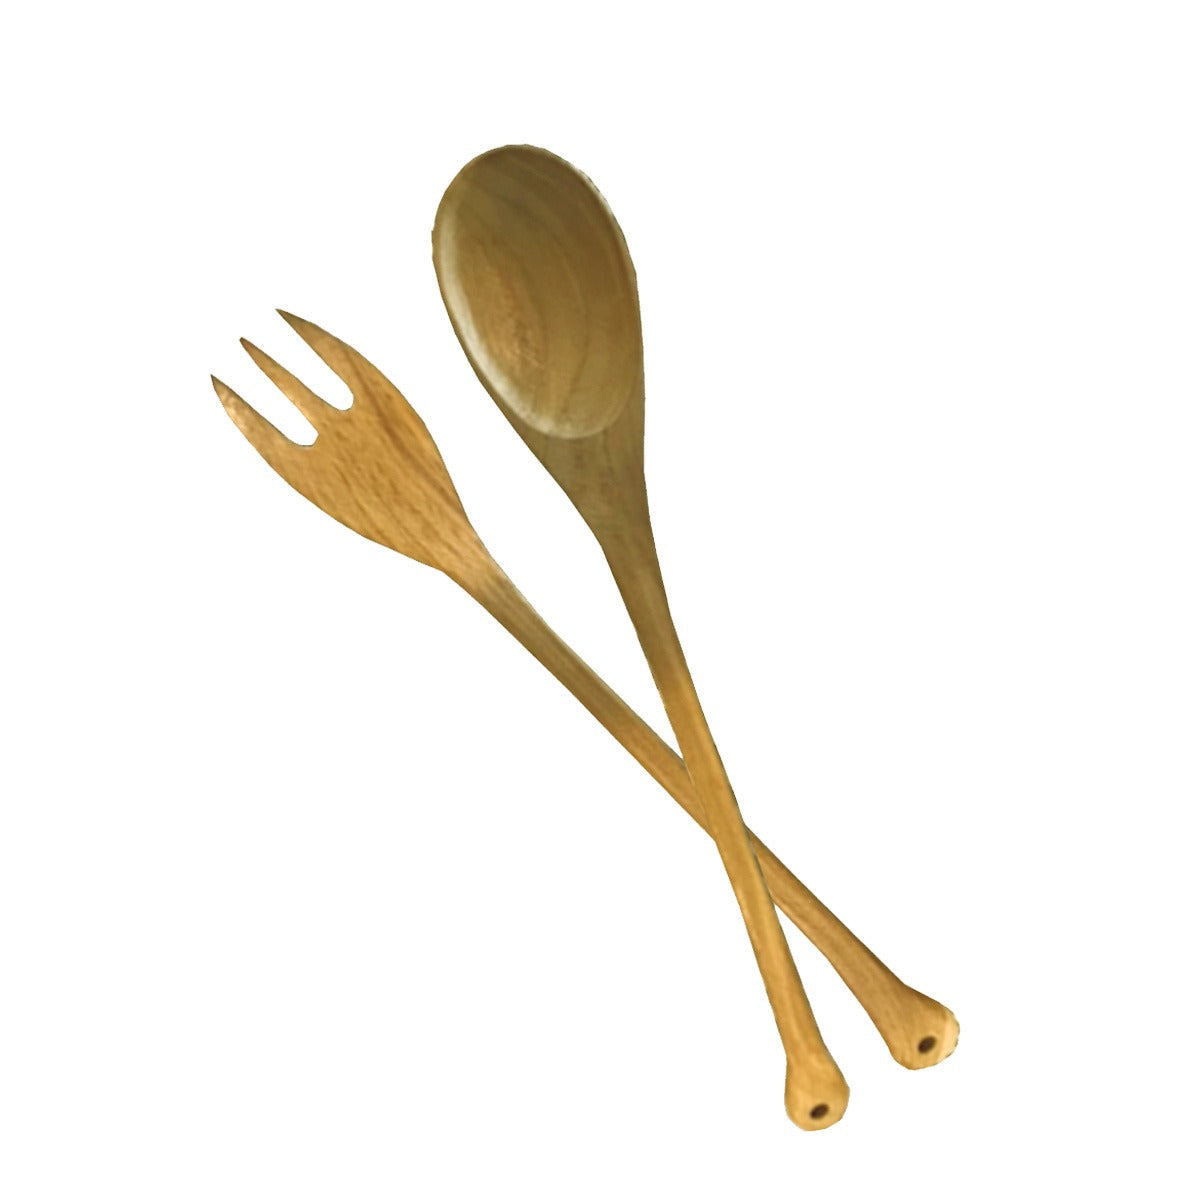 Wooden Spoon & Fork - Set of 2